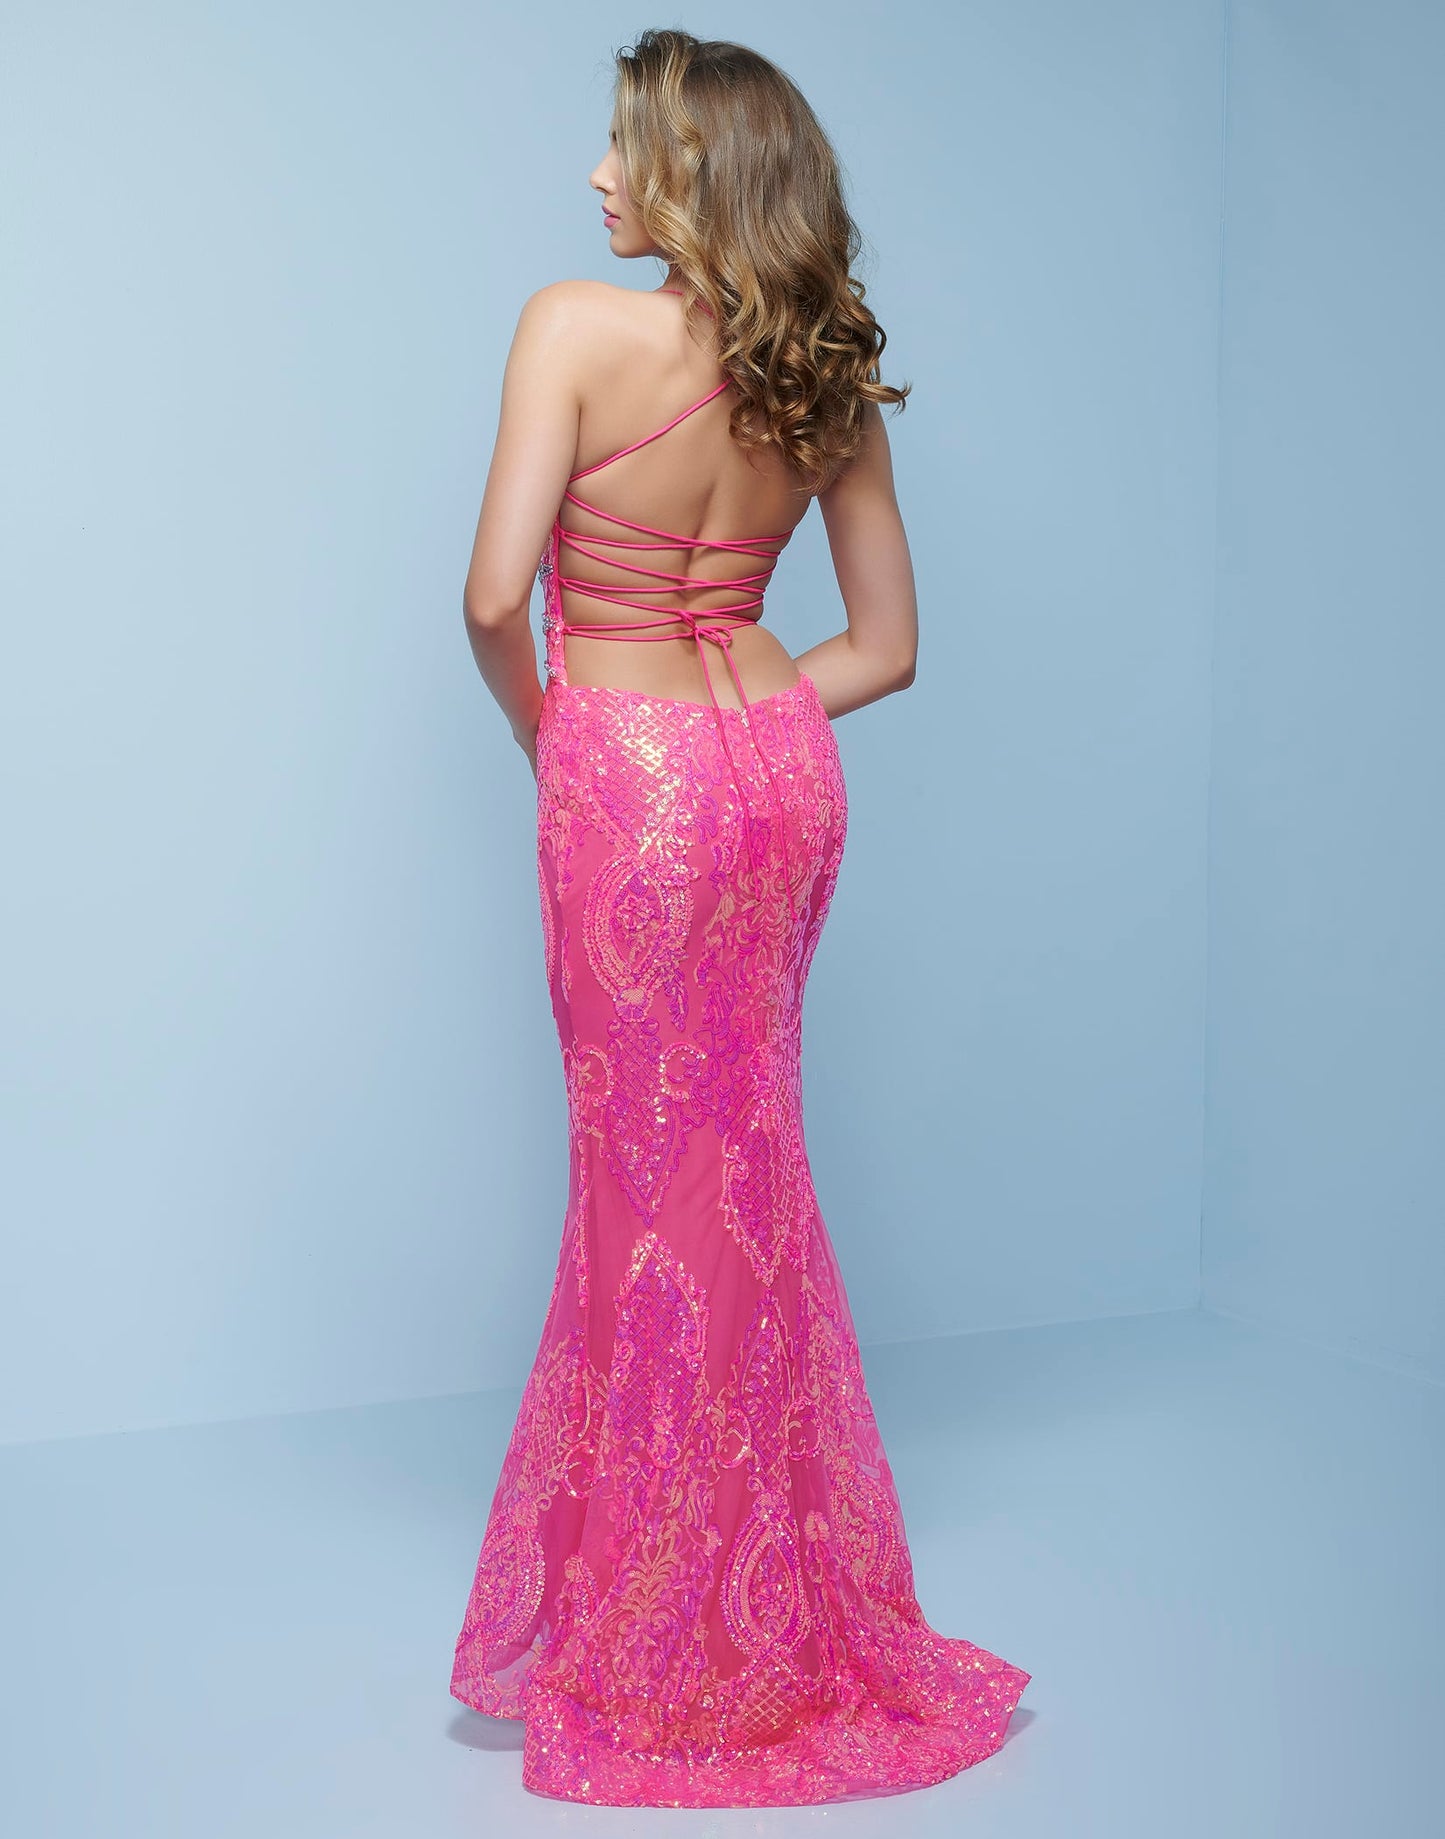 Splash Prom K526 This is a neon sequin column prom dress with low open lace up tie back.  This evening pageant gown features a plunging v neckline with criss cross beading in the front. Colors Neon Pink, Neon Blue Sizes  00, 0, 2, 4, 6, 8, 10, 12, 14, 16, 18, 20, 22, 24, 26, 28